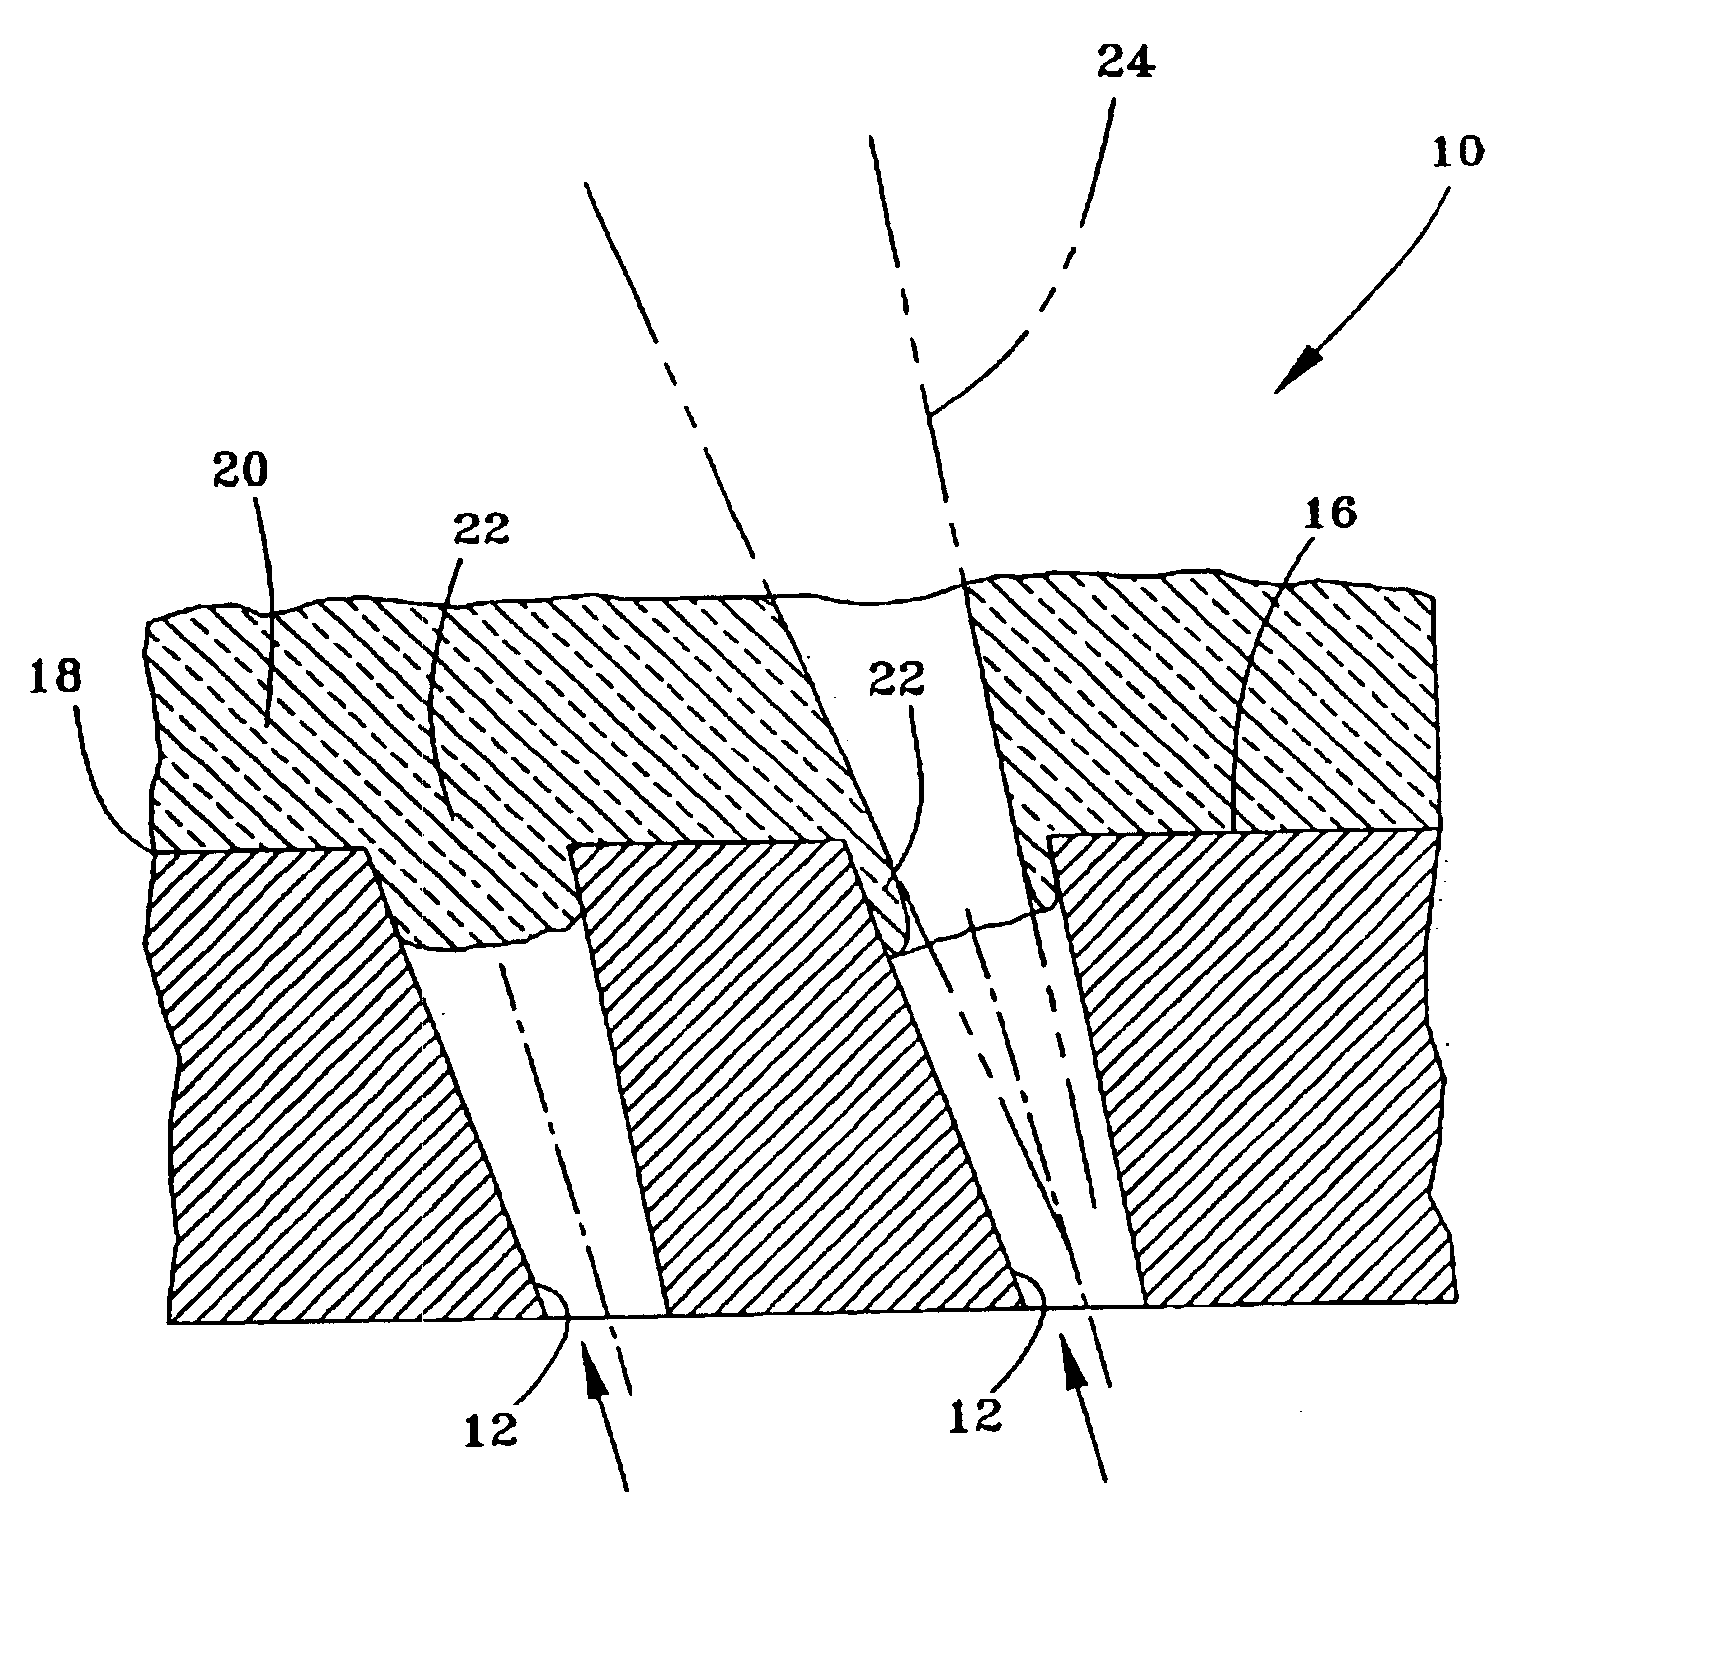 Process of removing a ceramic coating deposit in a surface hole of a component